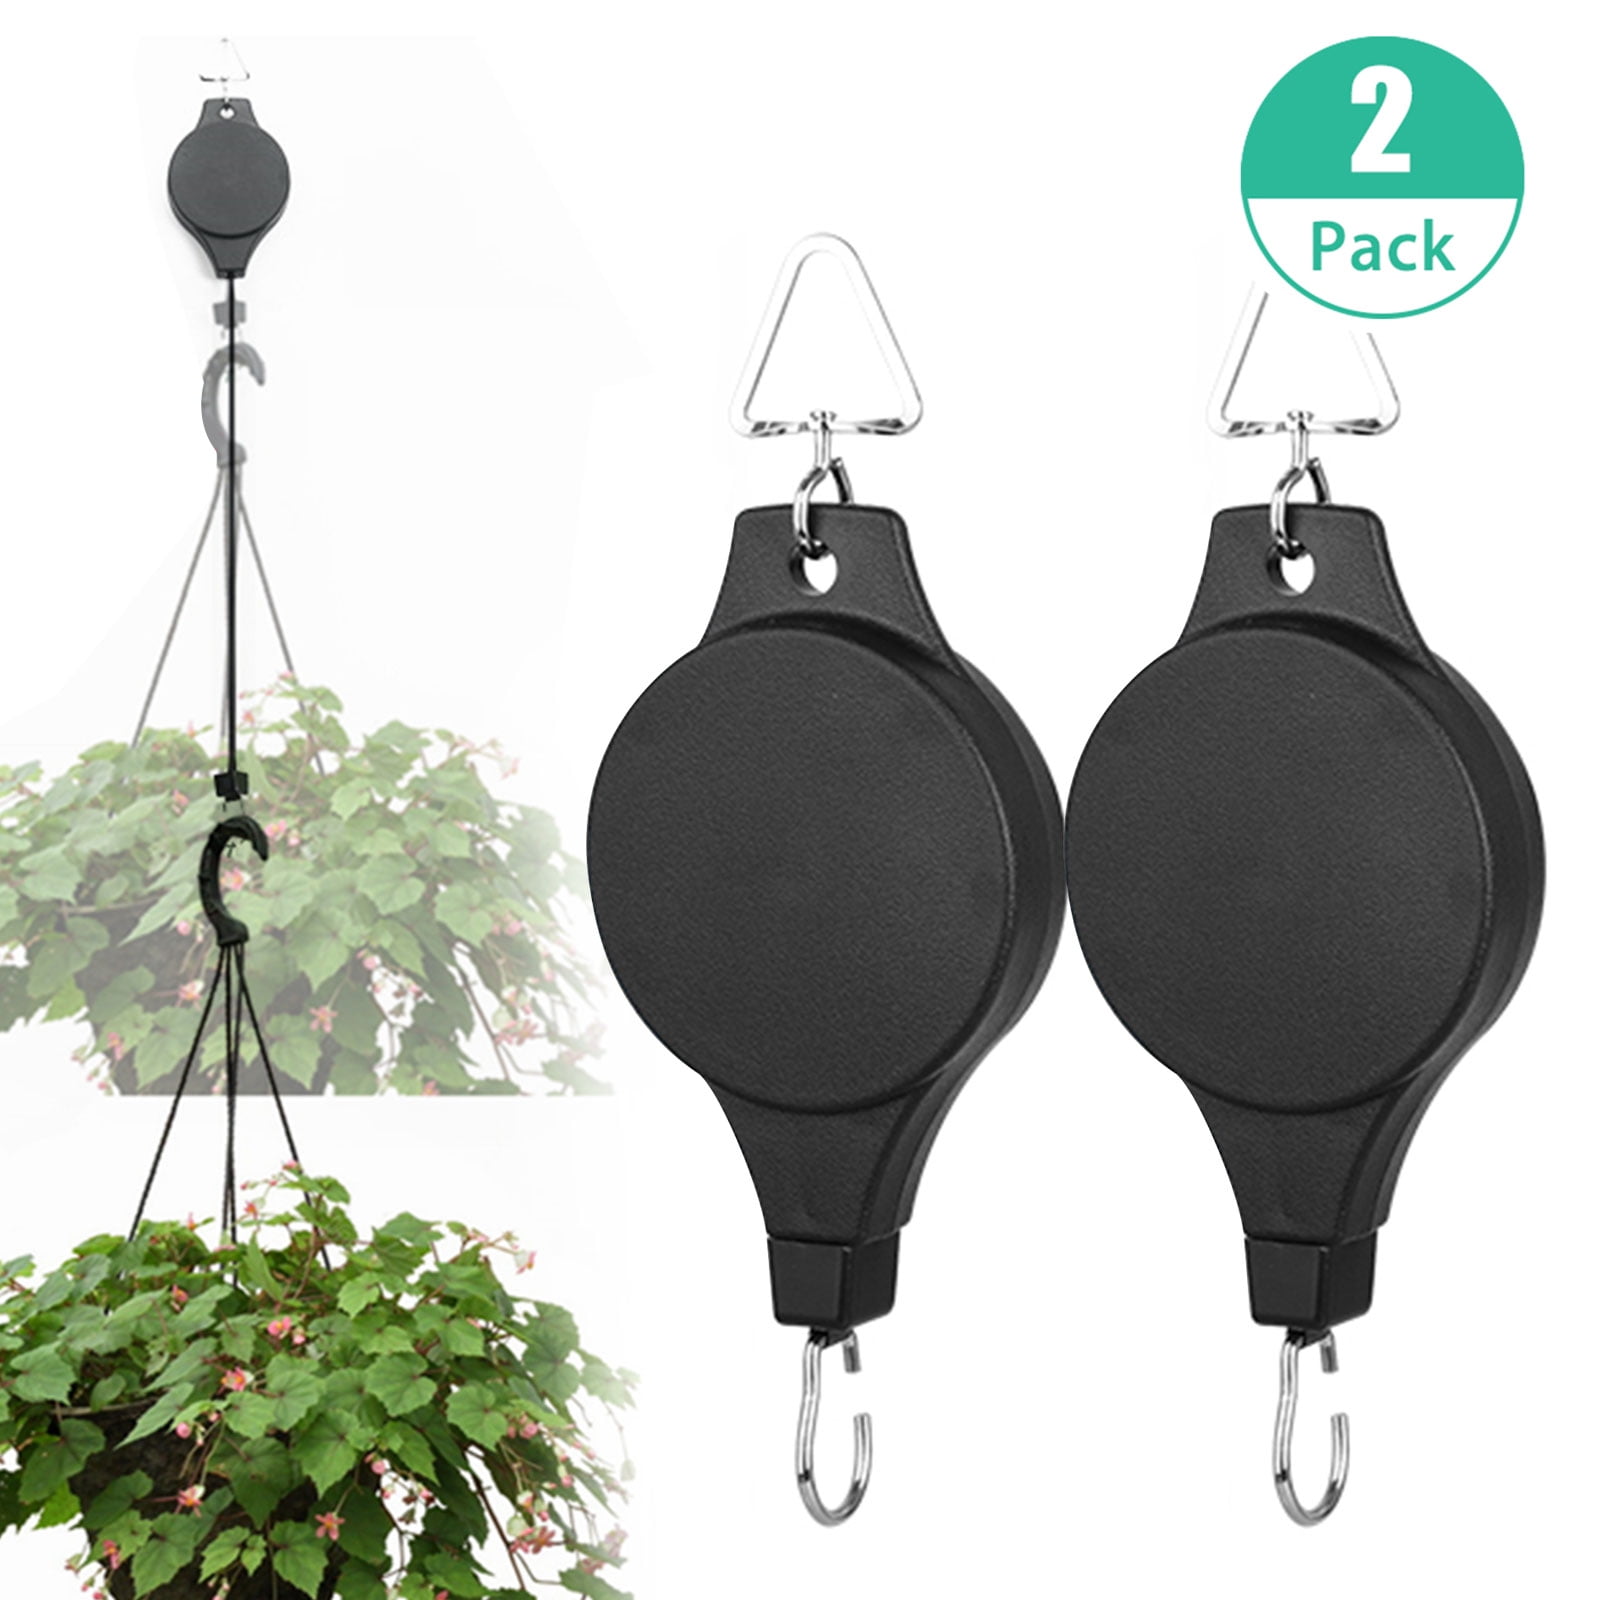 Jiayi Hook for Plant 2 Pack 12 inch Hook Hanging Plant Robust for Hanging Baskets of Plants Decorative Hook for Wrought Iron Lantern Fence Holder for Feeder